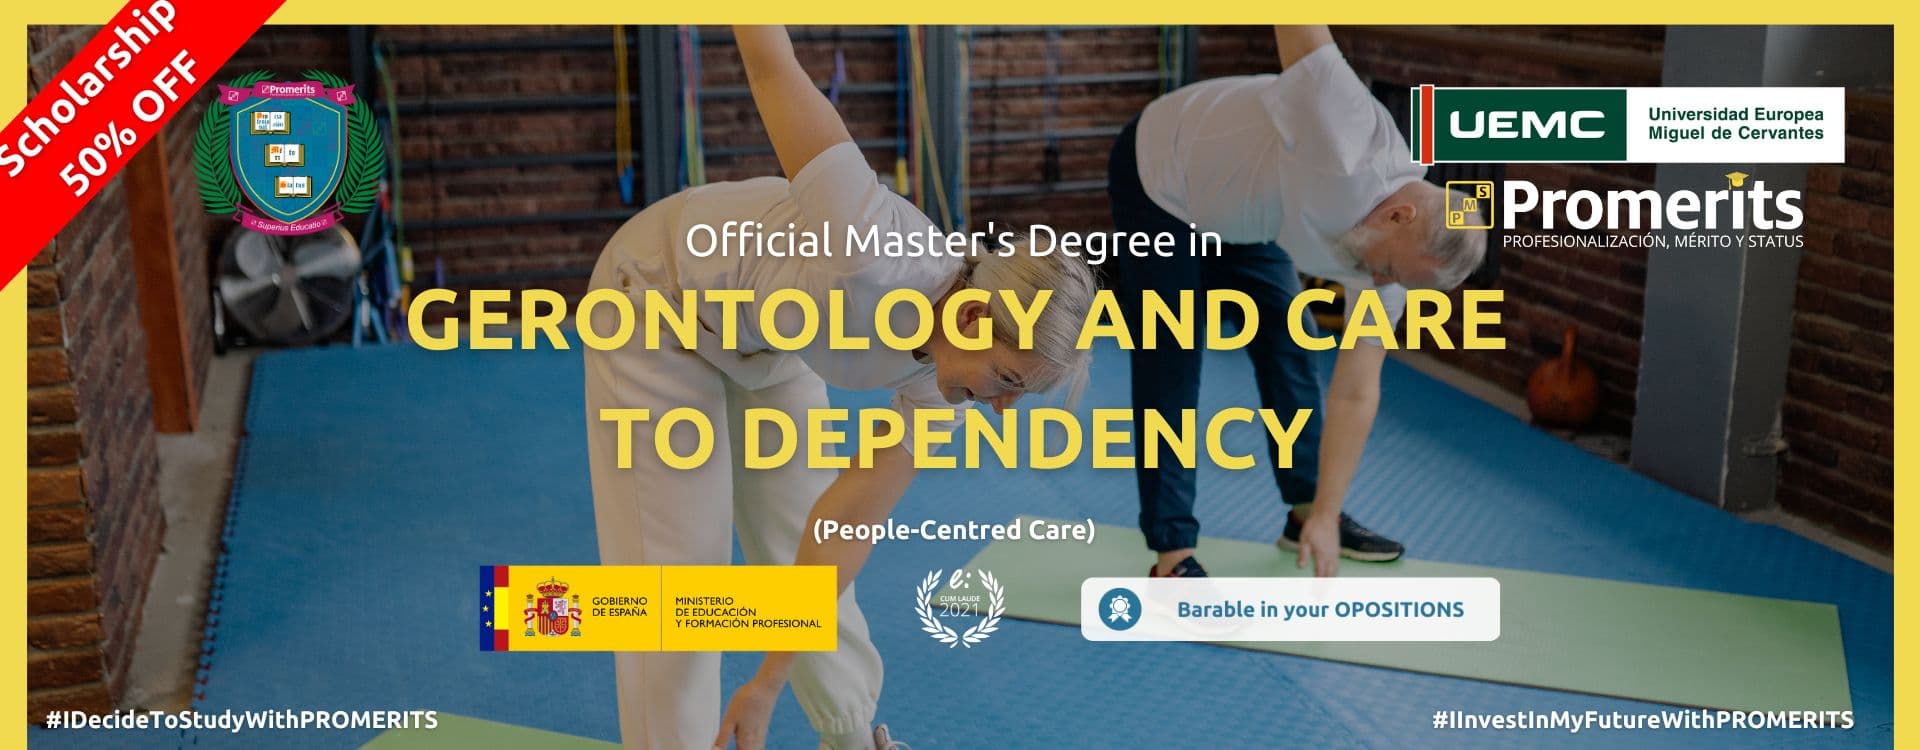 Official Master´s Degree in Gerontology and Care to Dependency